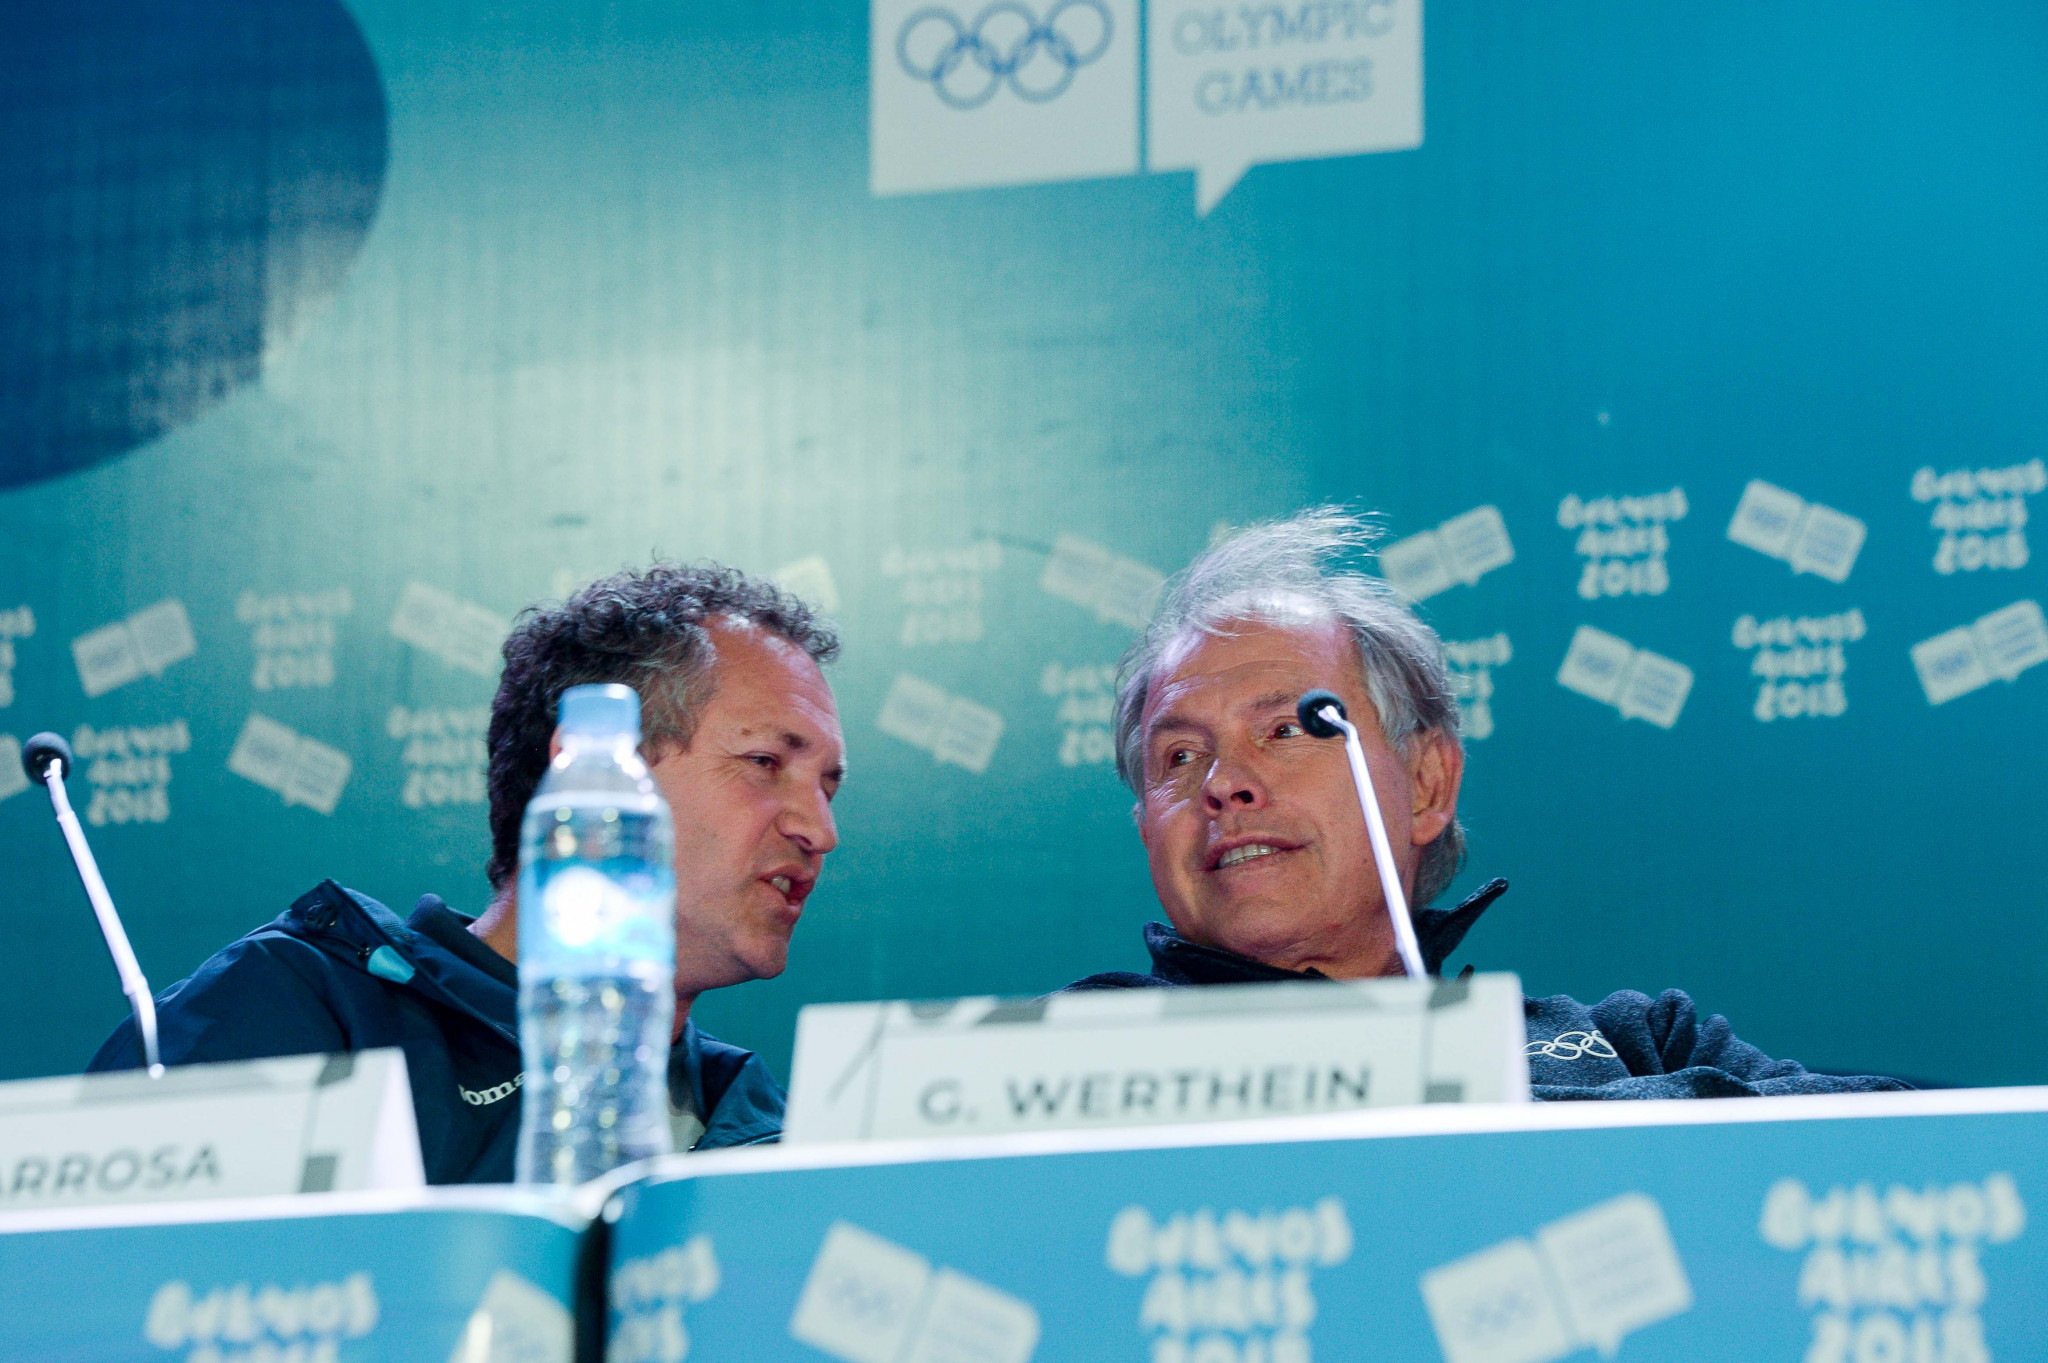 Buenos Aires 2018 President Gerardo Werthein claims athletes will be competing in Olympic-standard facilities ©Buenos Aires 2018